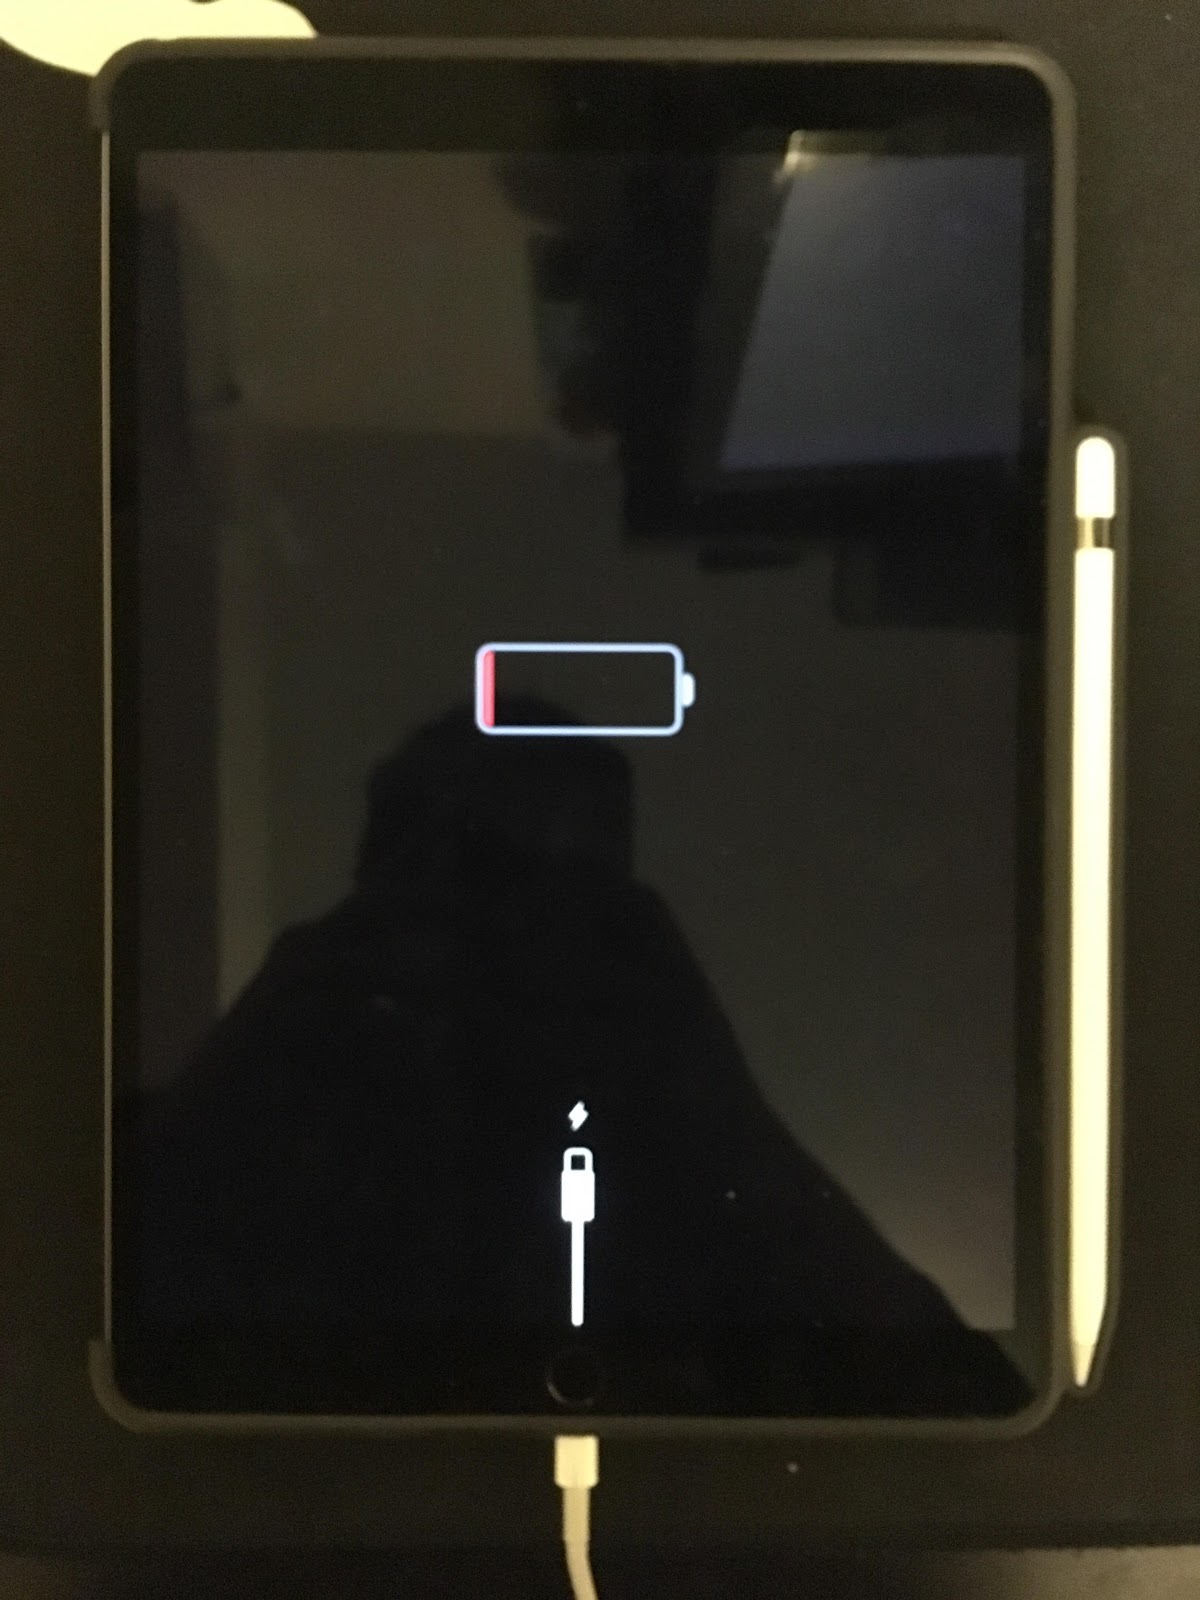 How to charge ipad without charger